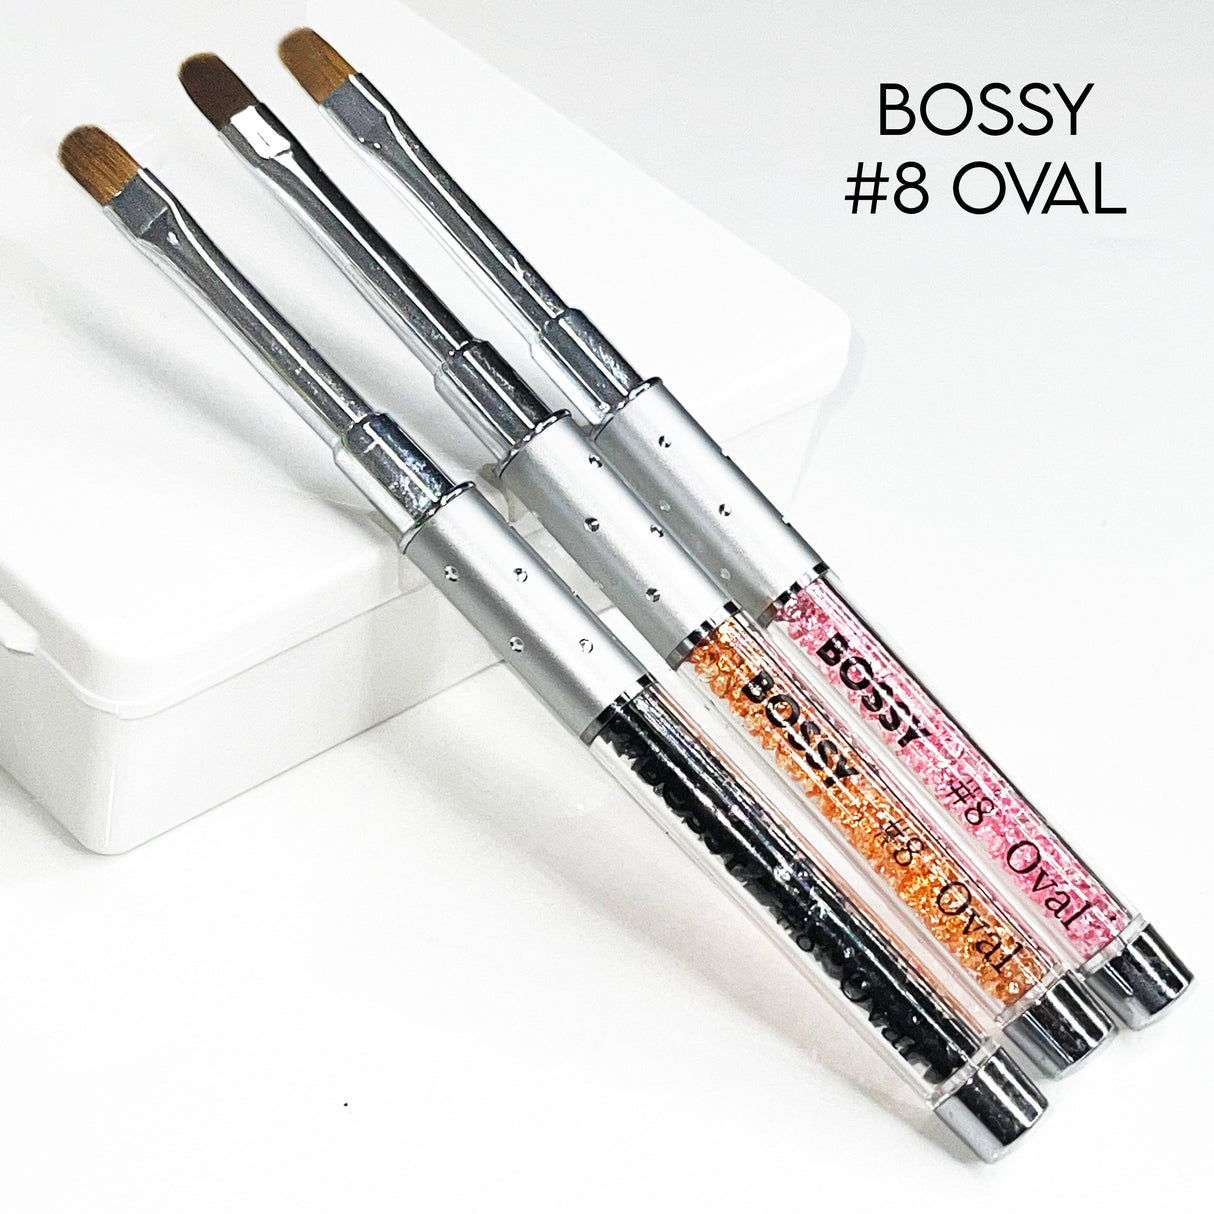 BOSSY Gel Brush Set Crimped OVAL (Lid included)